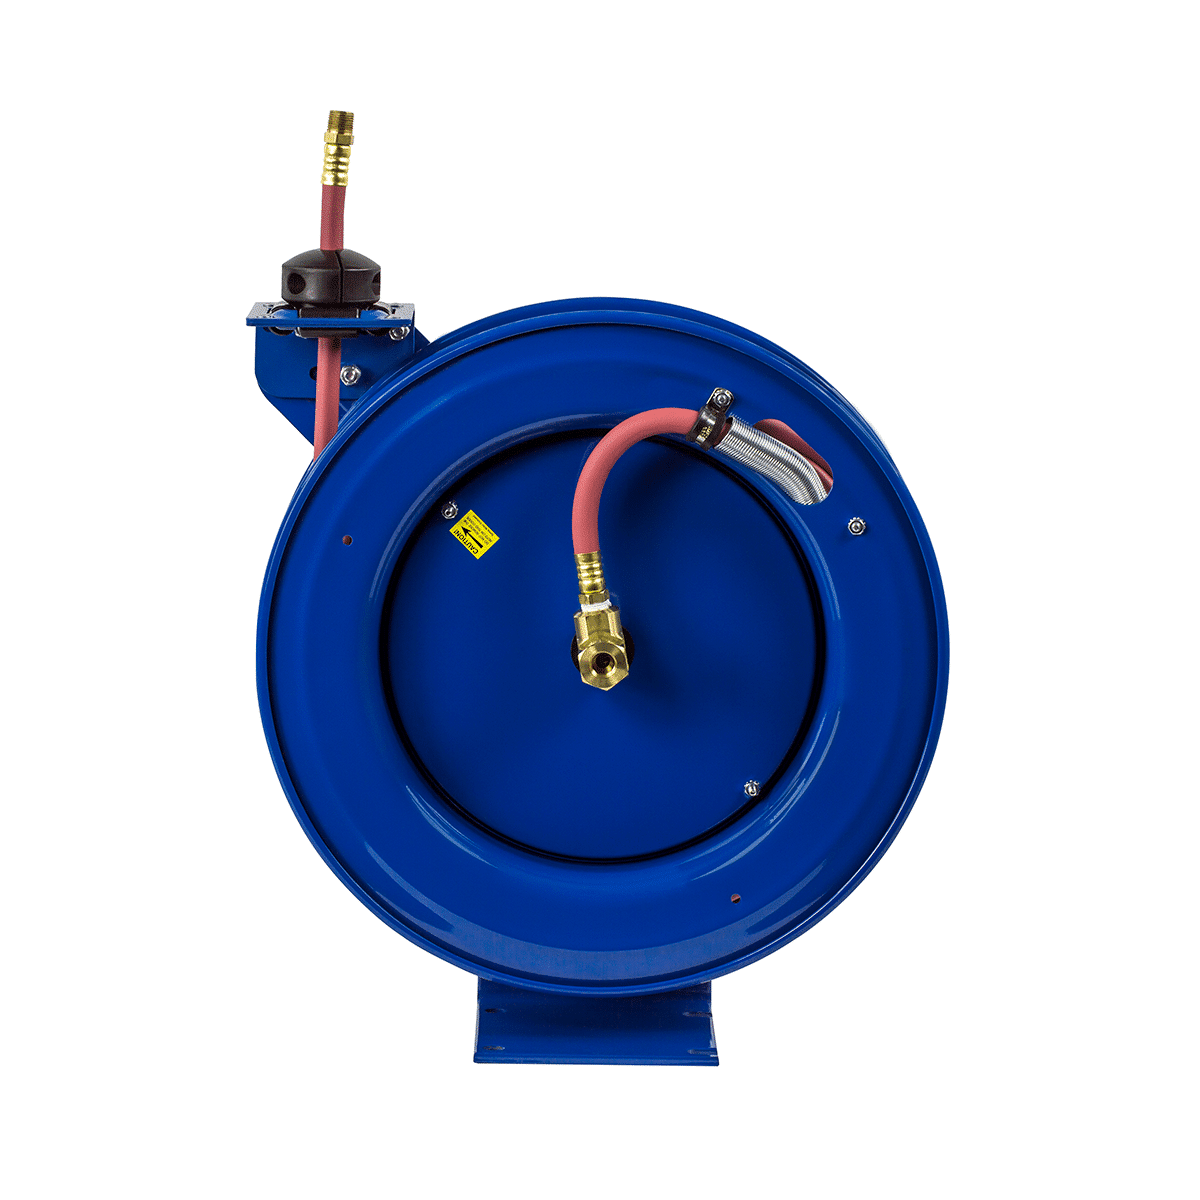 Buy Coxreels® Heavy-Duty Spring Rewind Hose Reel online at Access 